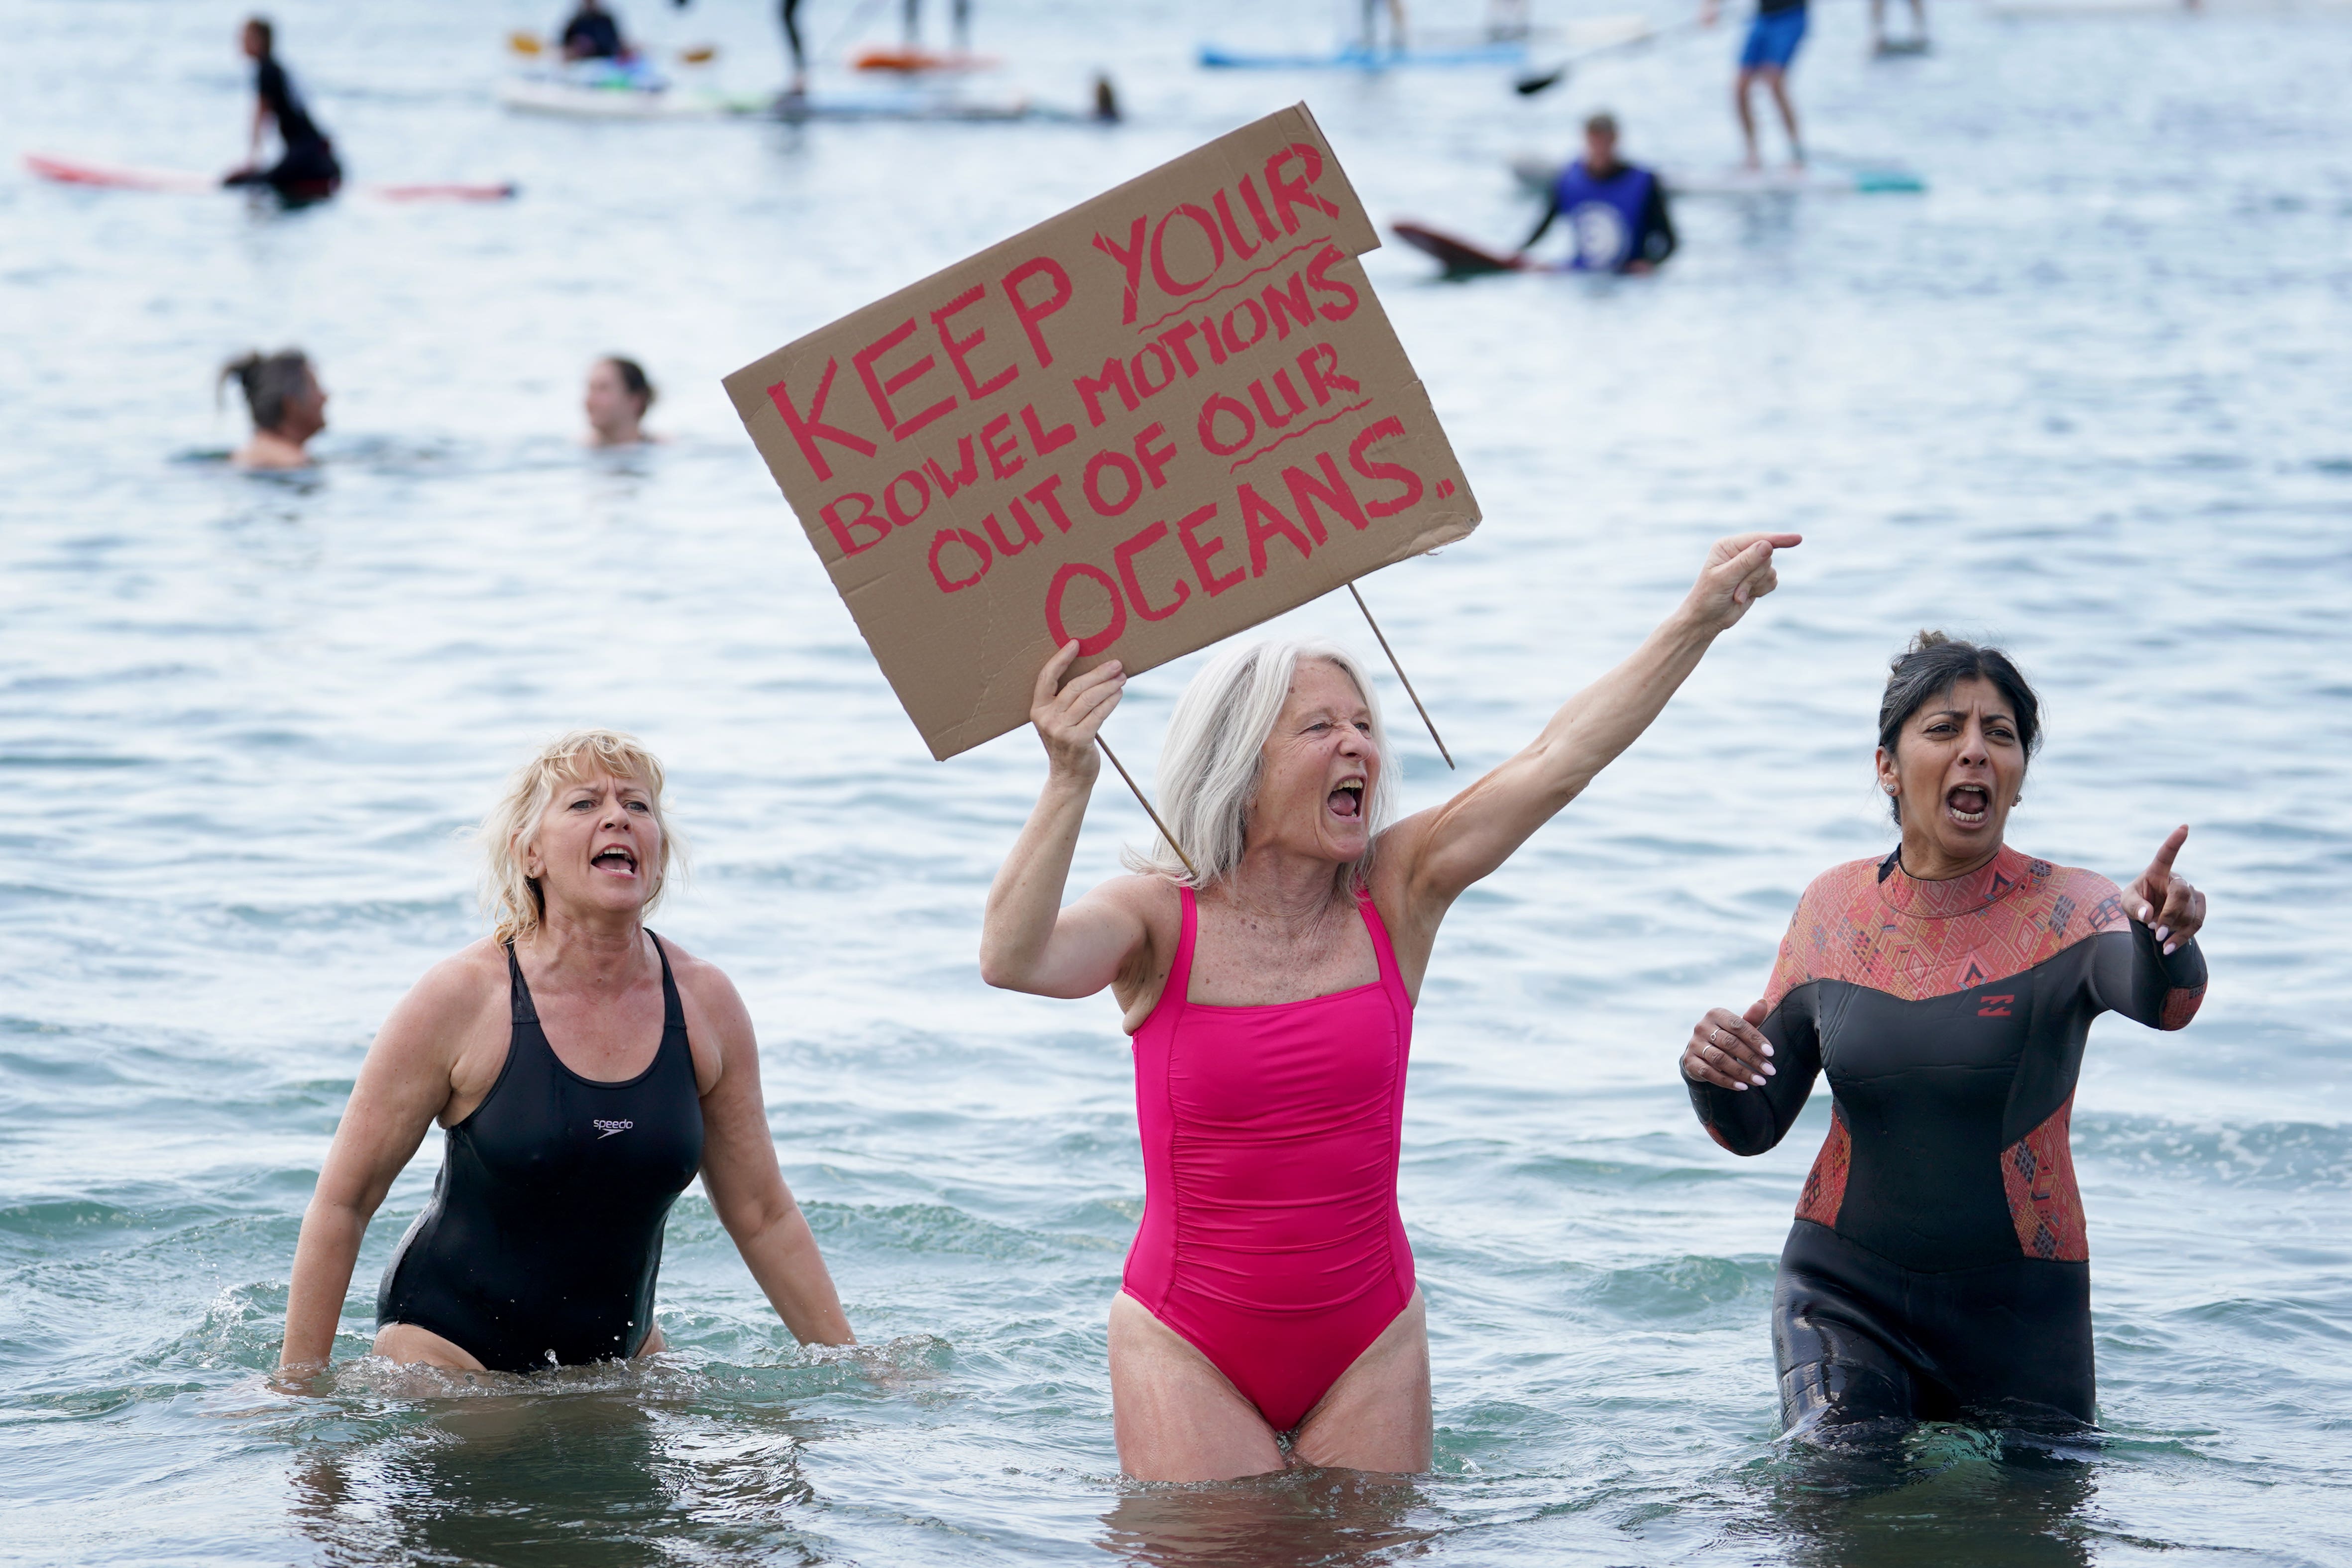 Last year, campaigners took to the sea to protest sewage dumping